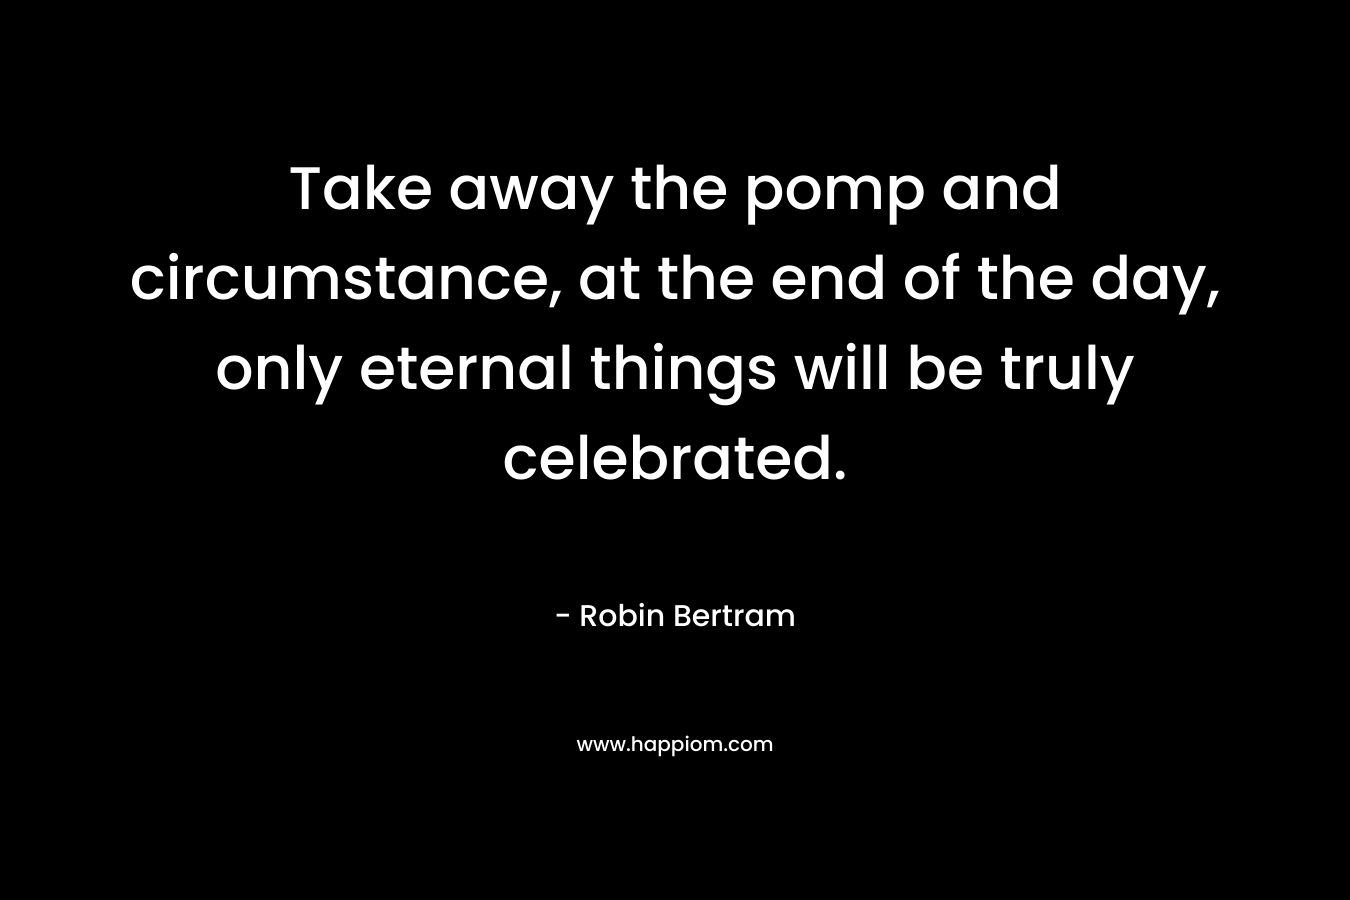 Take away the pomp and circumstance, at the end of the day, only eternal things will be truly celebrated.